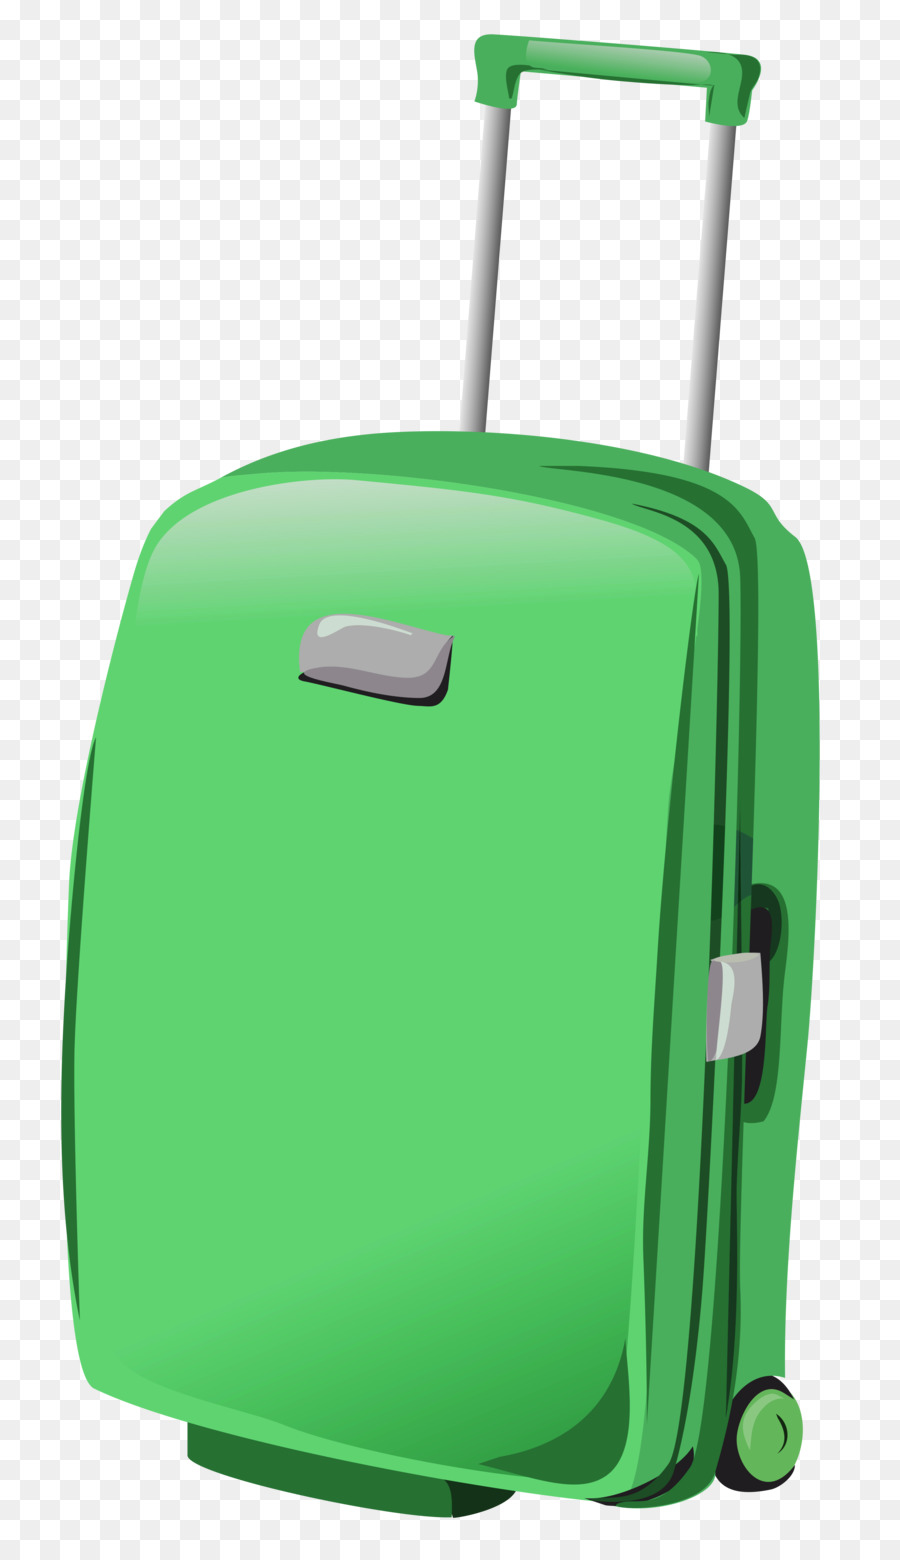 Suitcase Baggage Clip art - Suitcases Cliparts png download - 2974*5135 - Free Transparent Suitcase png Download.